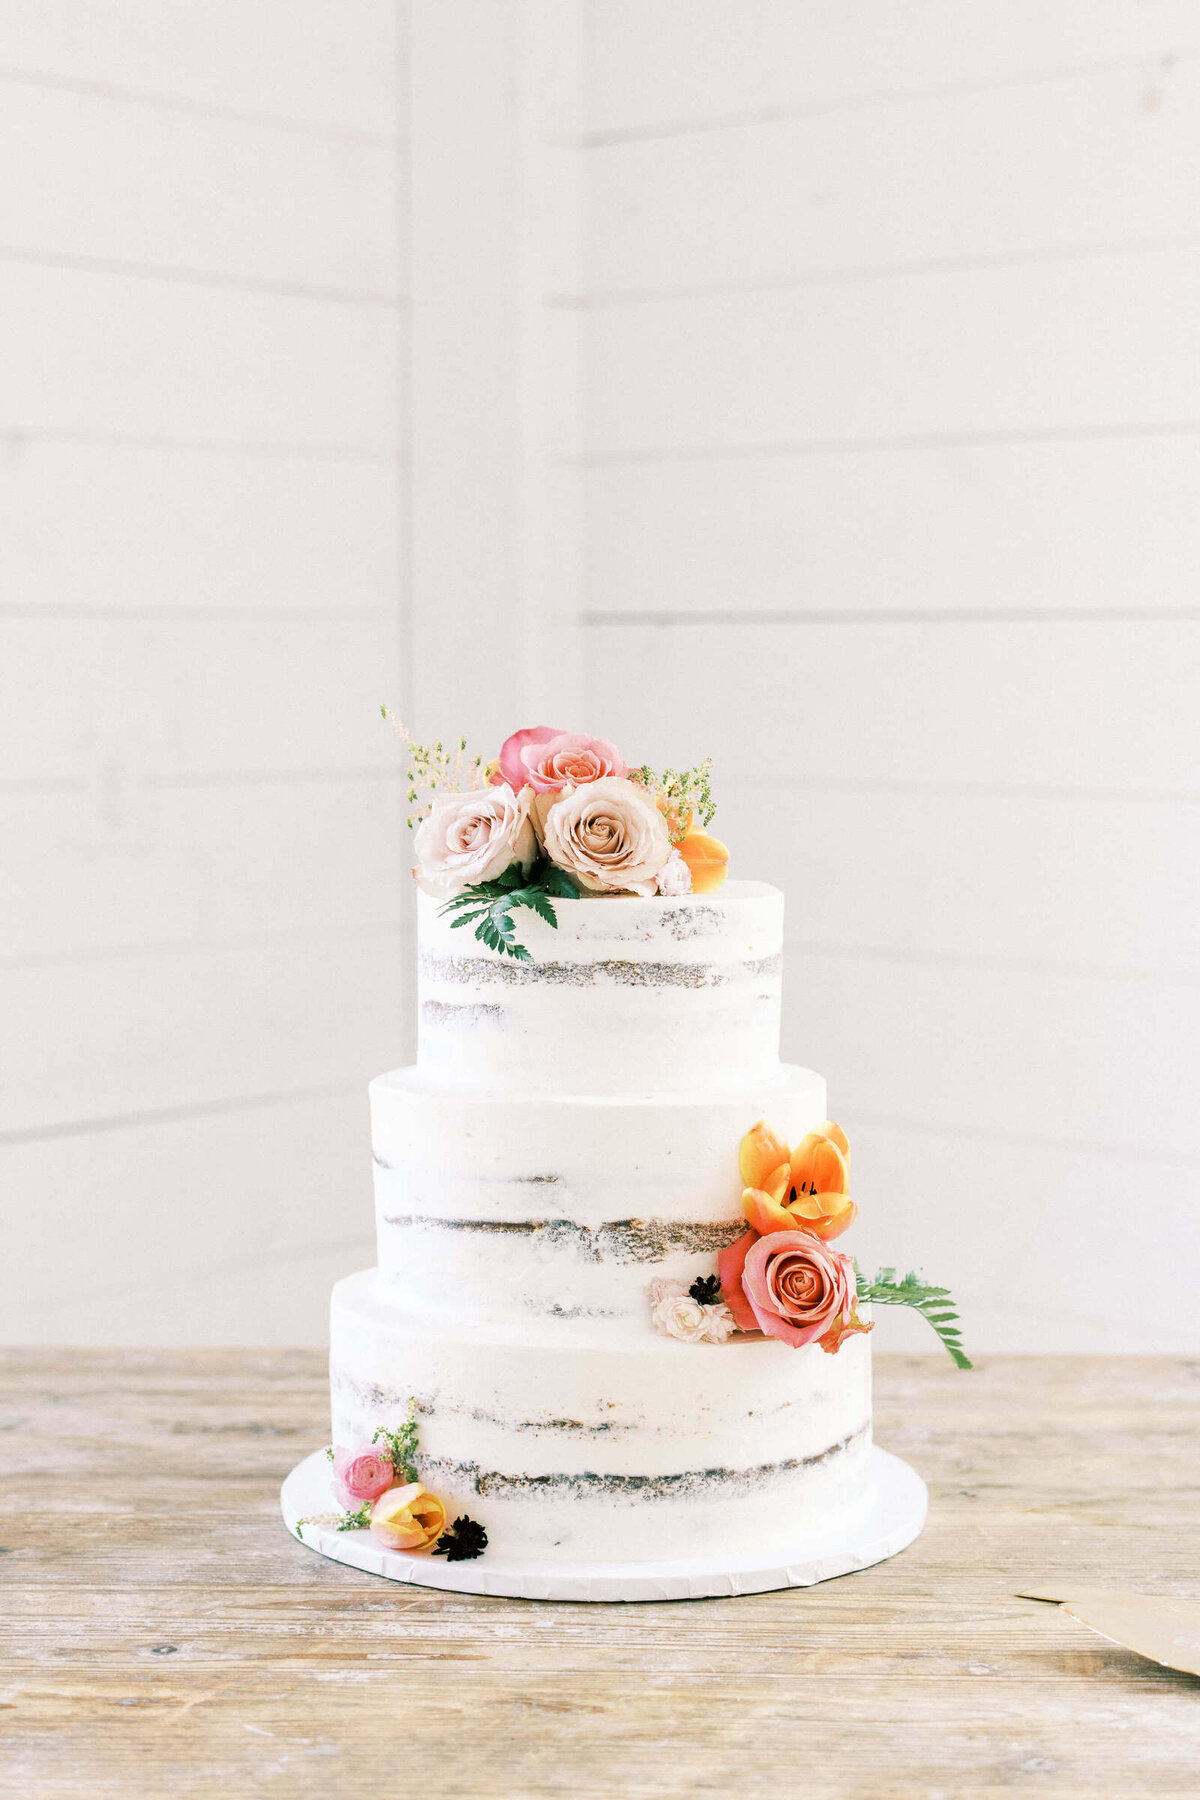 Naked wedding cake with roses at barn venue in North Texas